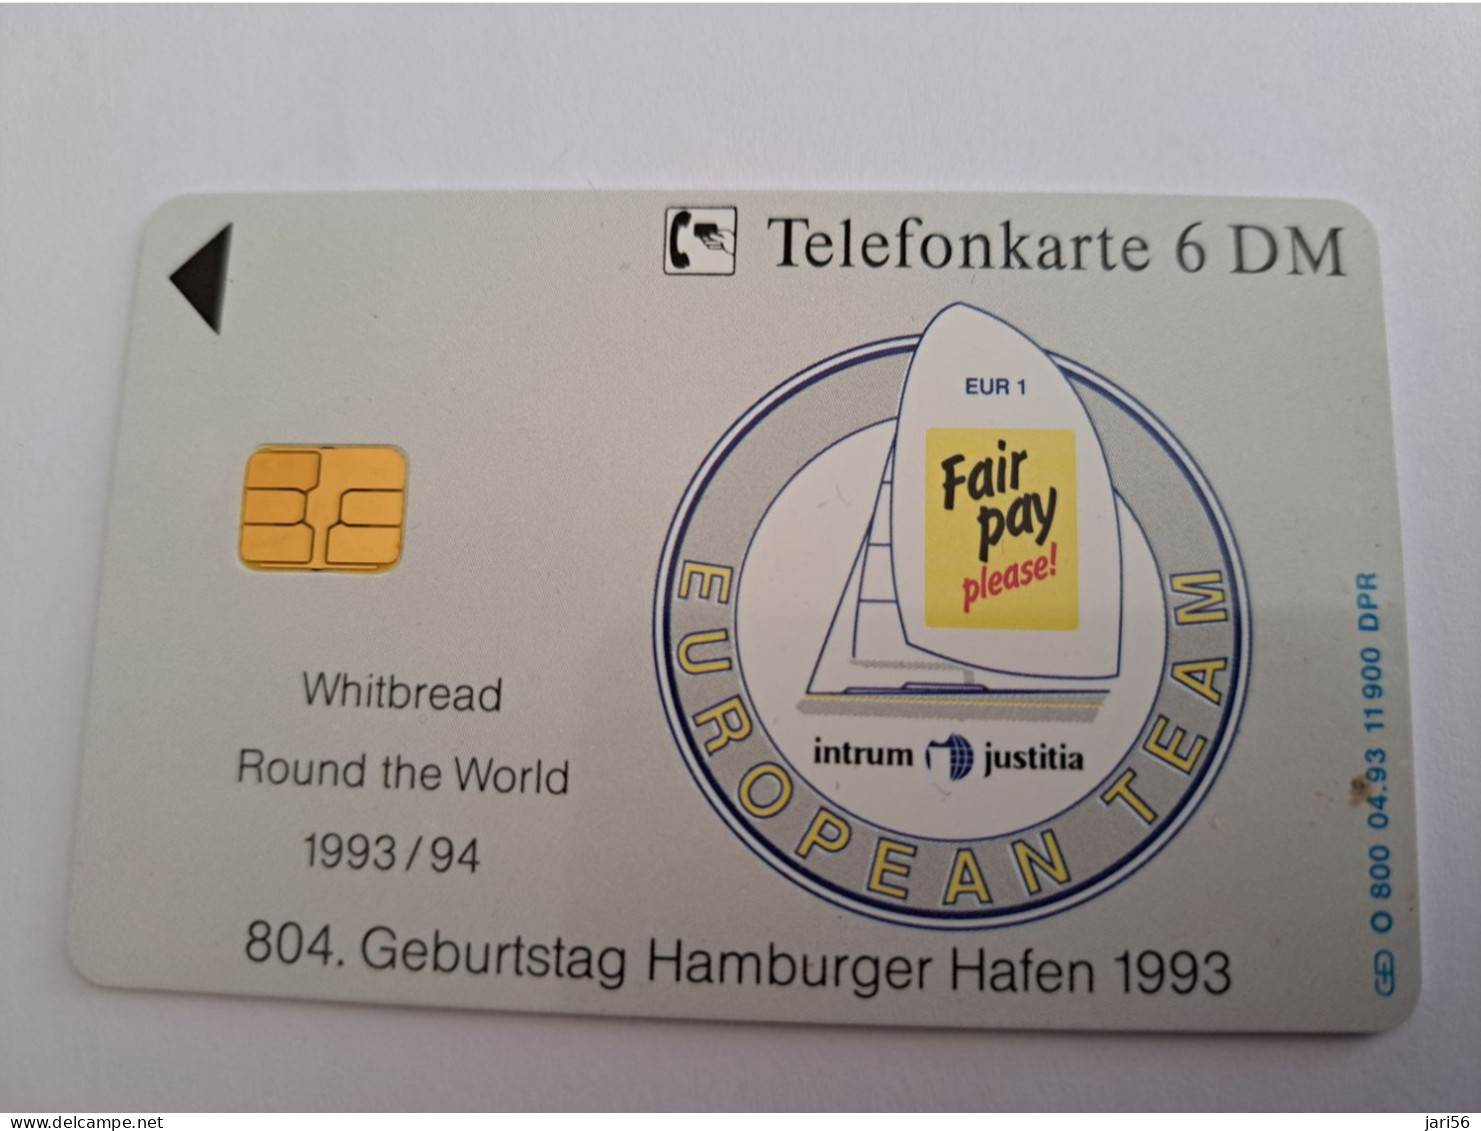 DUITSLAND/ GERMANY  CHIPCARD / JUSTITIA INTRUM/ WHEIBREAD RACE/ BOAT  /  O-800  111900 EX  / MINT CARD     **16655** - K-Series : Customers Sets